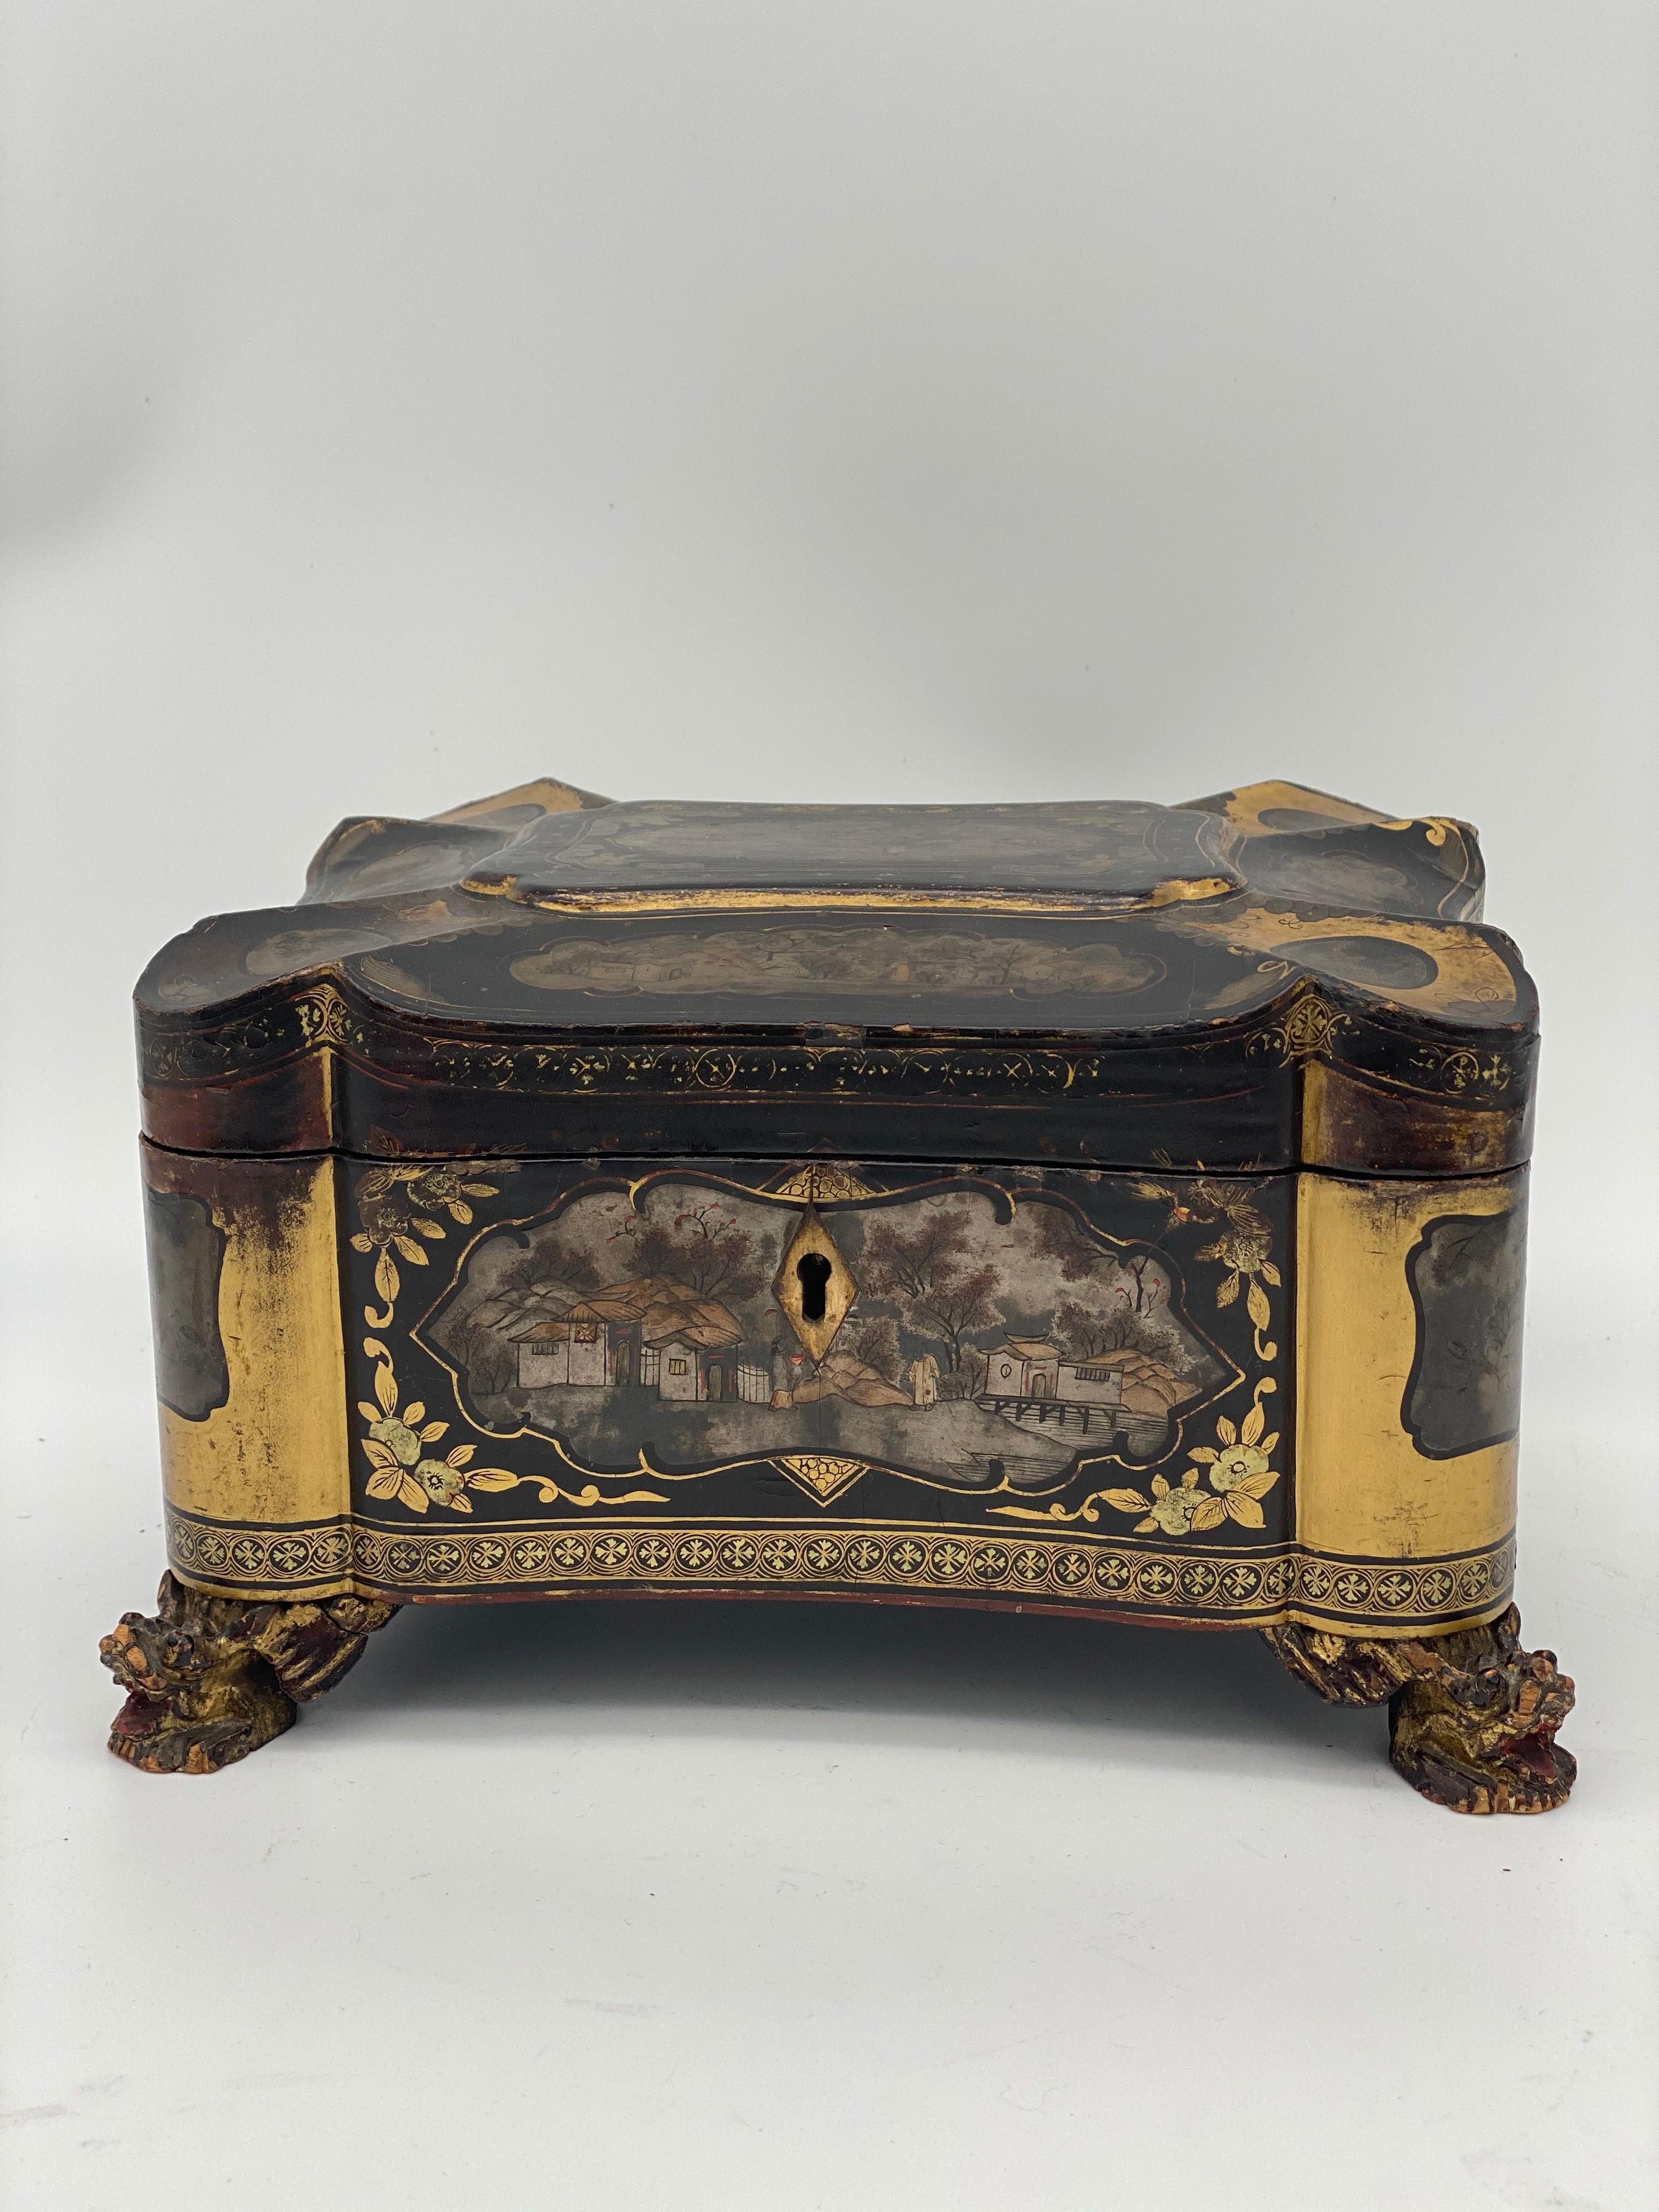 19th century golden black lacquer Chinese tea caddy with a key, the rectangular-section body decorated with panels of landscapes and patterned decoration throughout retains original hardware and is set upon carved foo lion feet, very beautiful